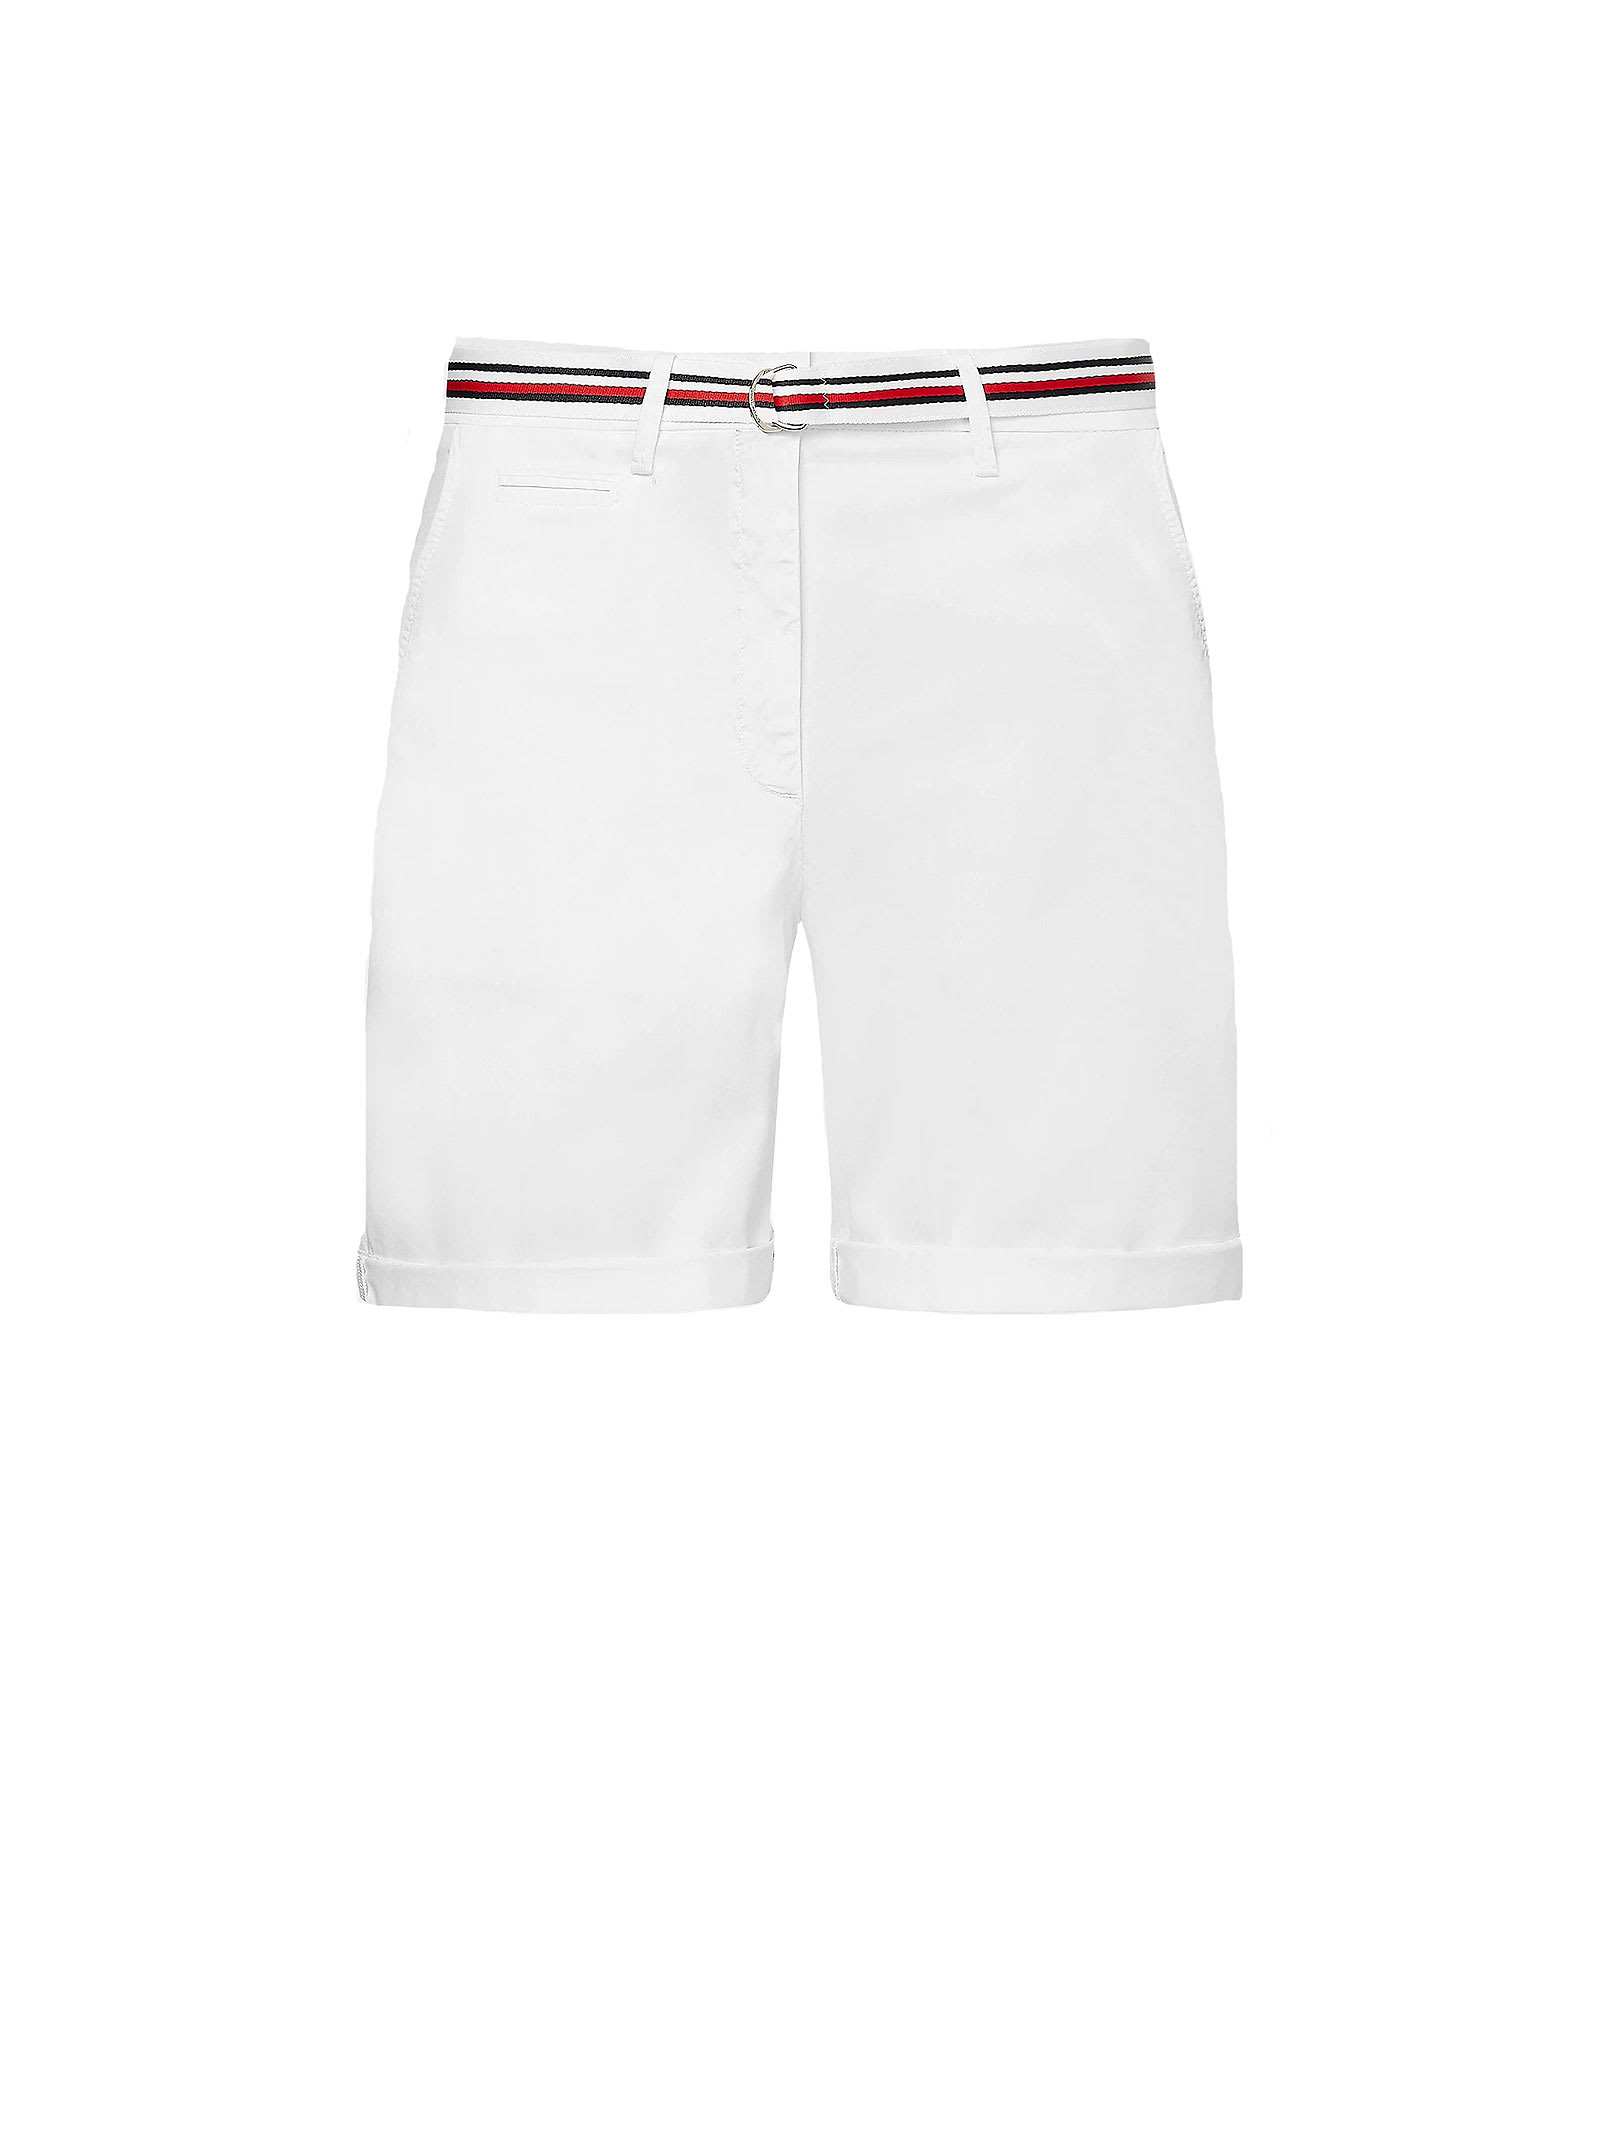 Tommy Hilfiger Bermuda Shorts In White Colored